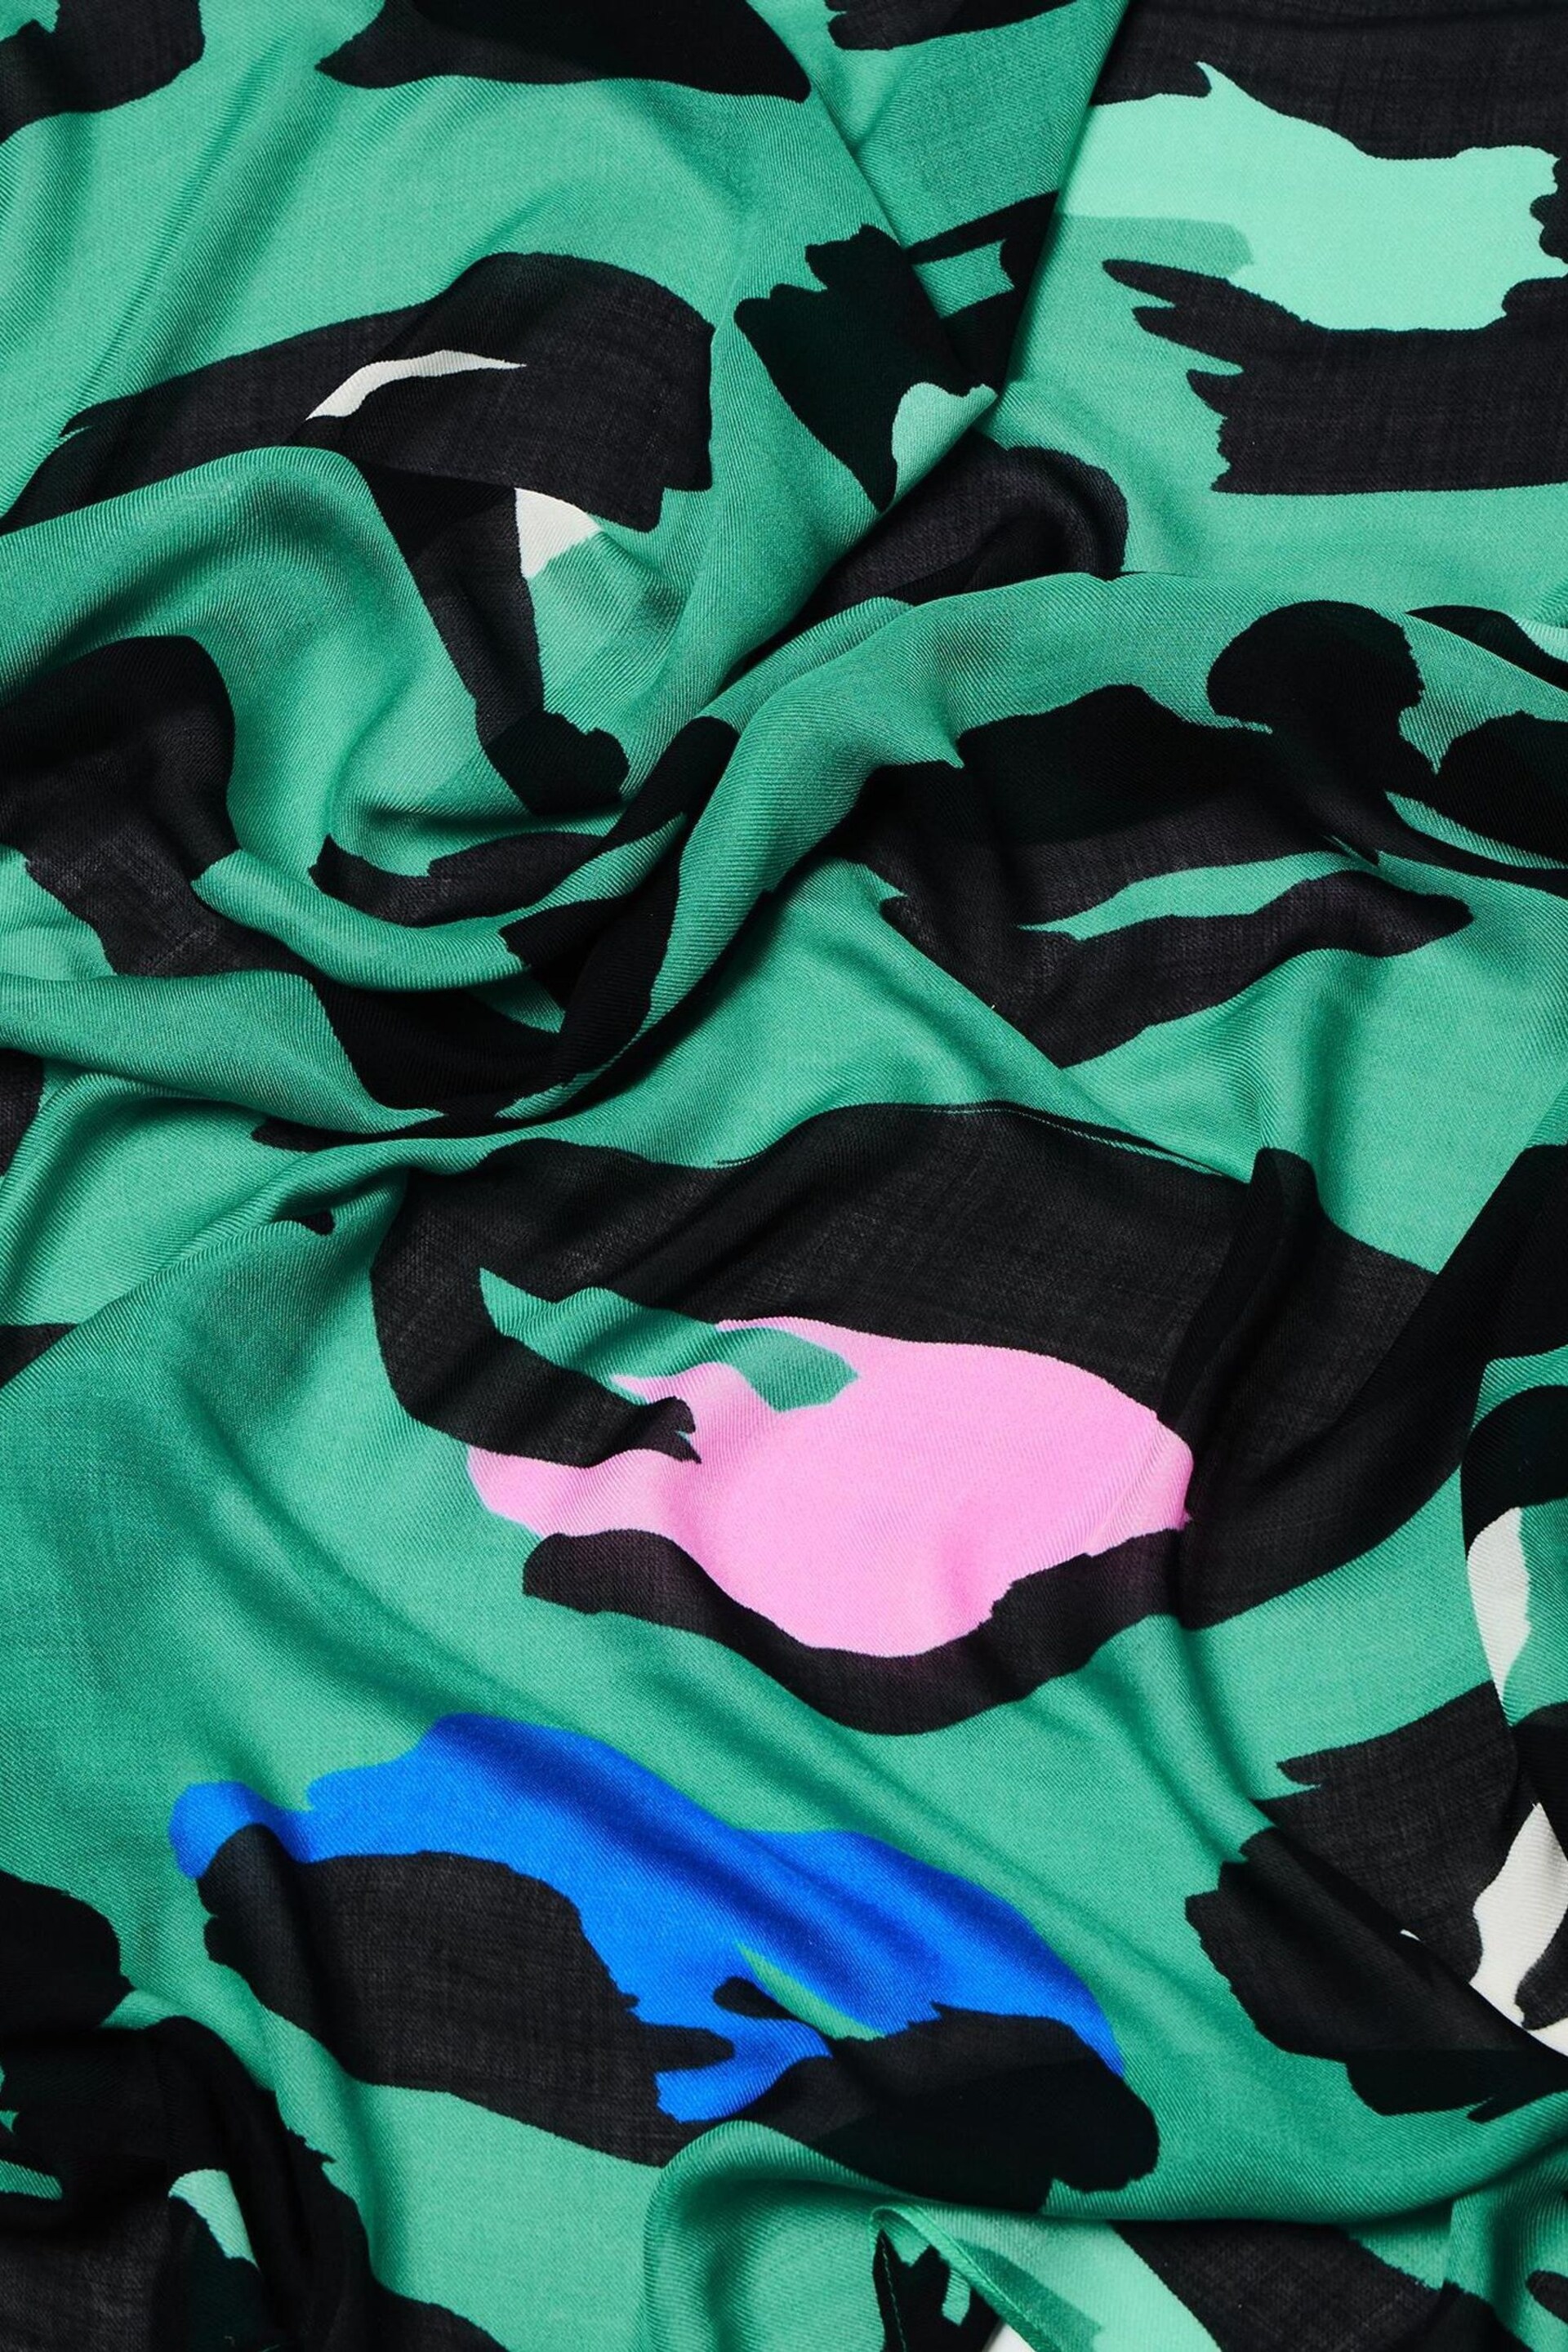 Oliver Bonas Green Oversized Abstract Animal Lightweight Scarf - Image 4 of 4